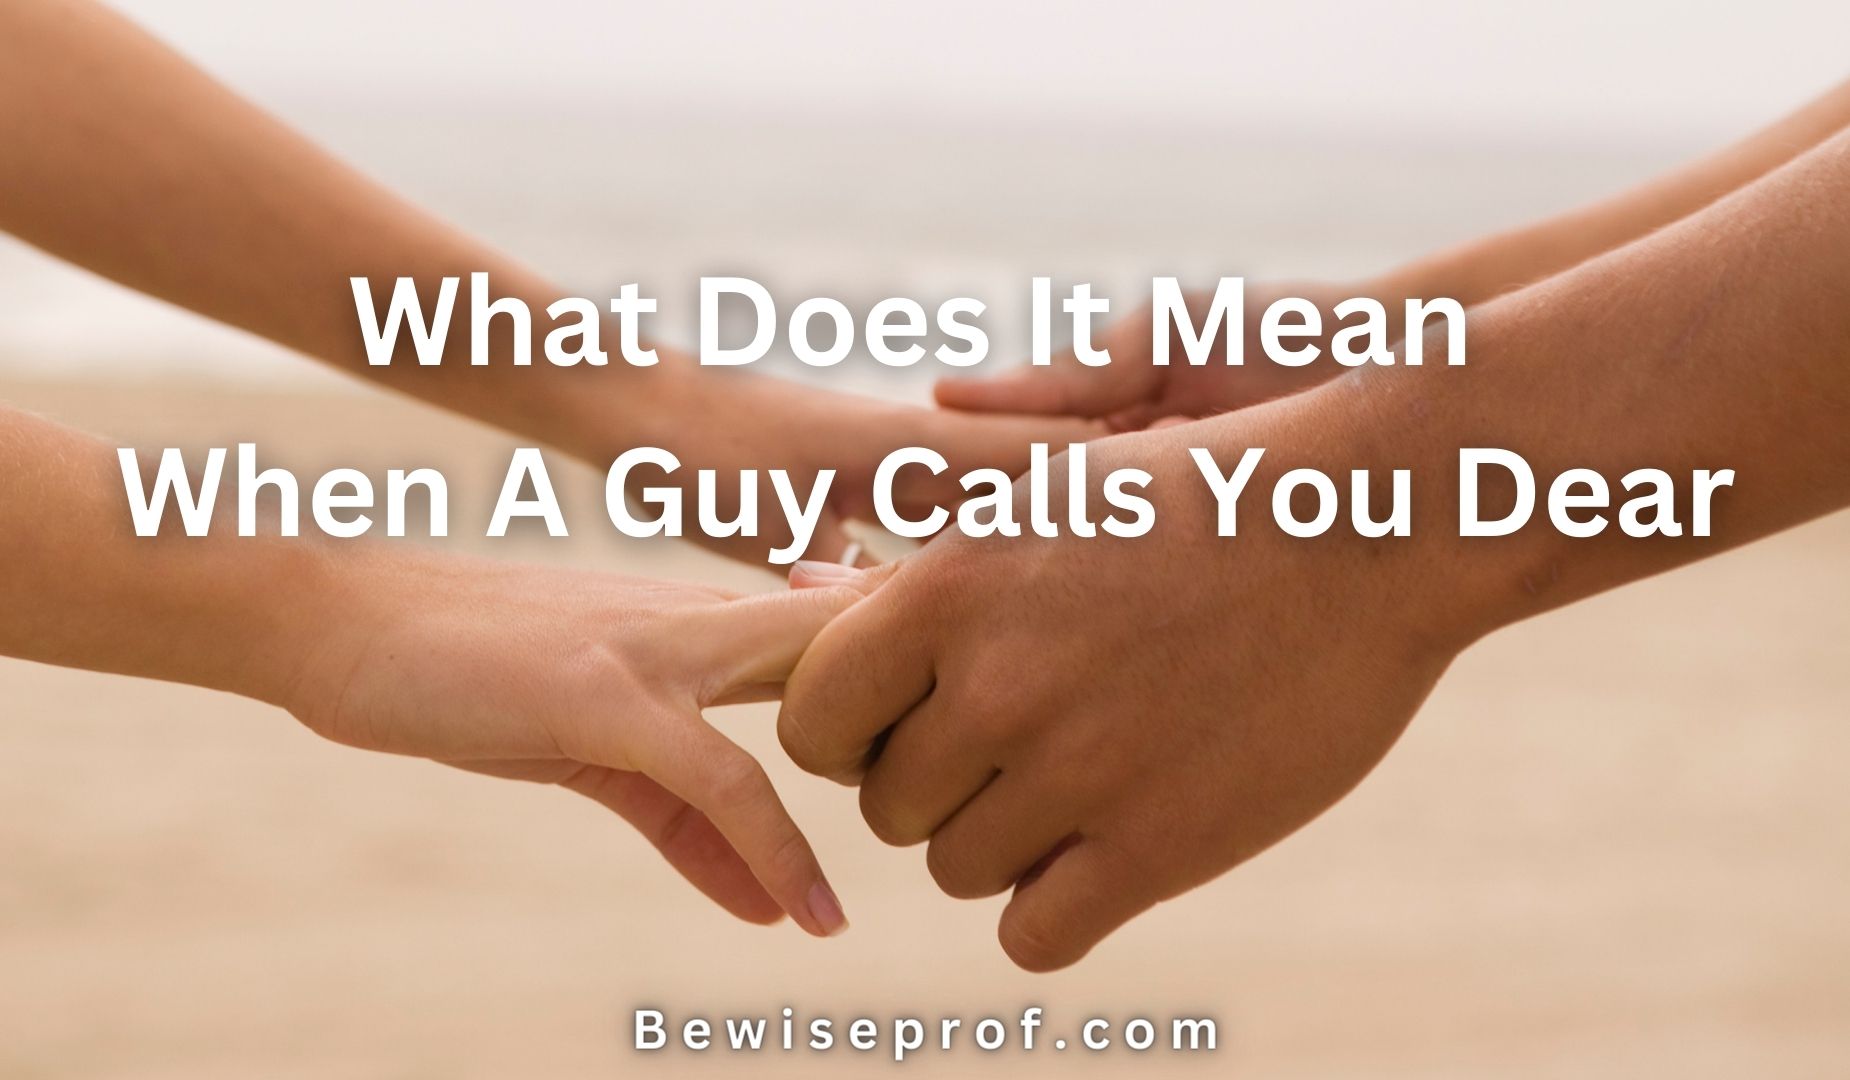 What Does It Mean When a Guy Calls You Dear